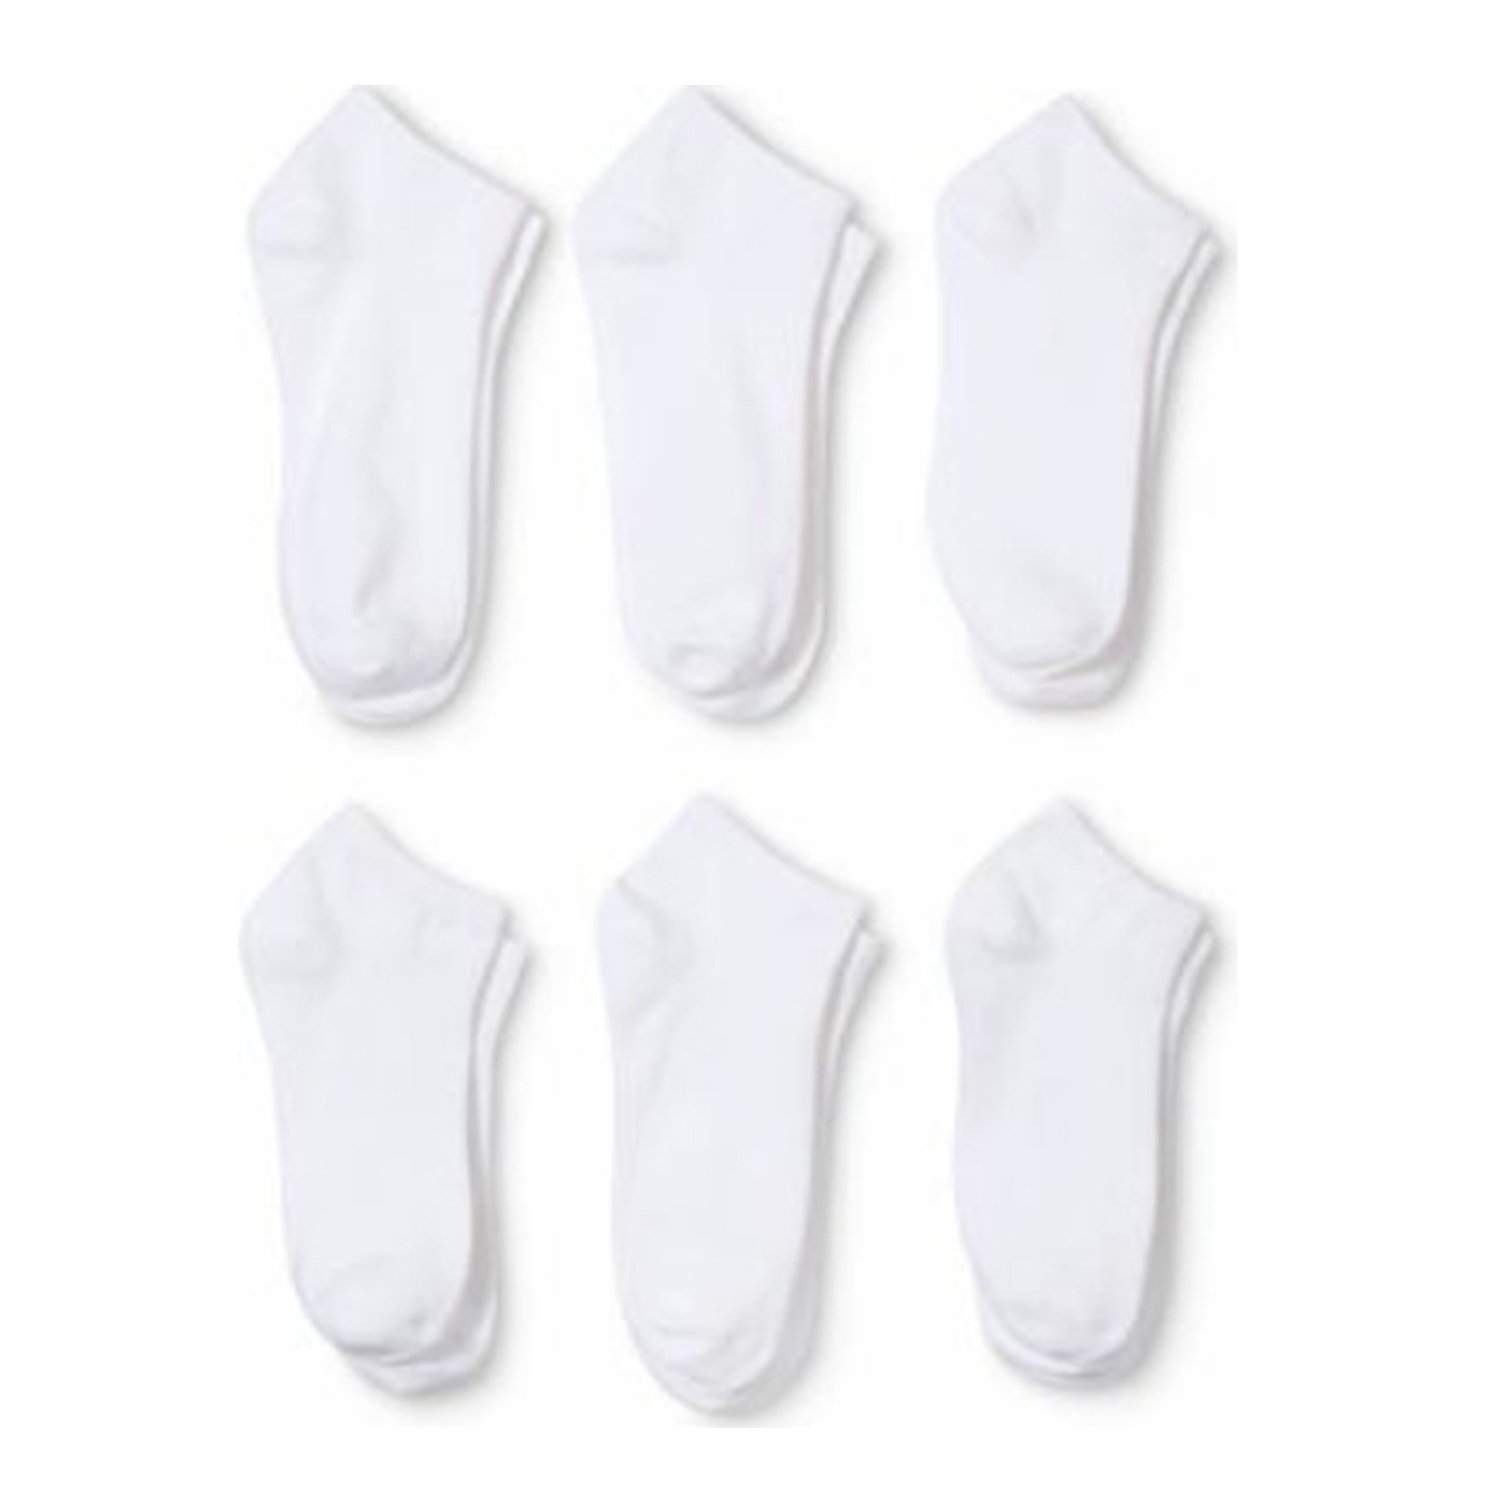 Unibasic Cotton Ankle socks - Low cut, no show Men and Women socks - 10 Pack